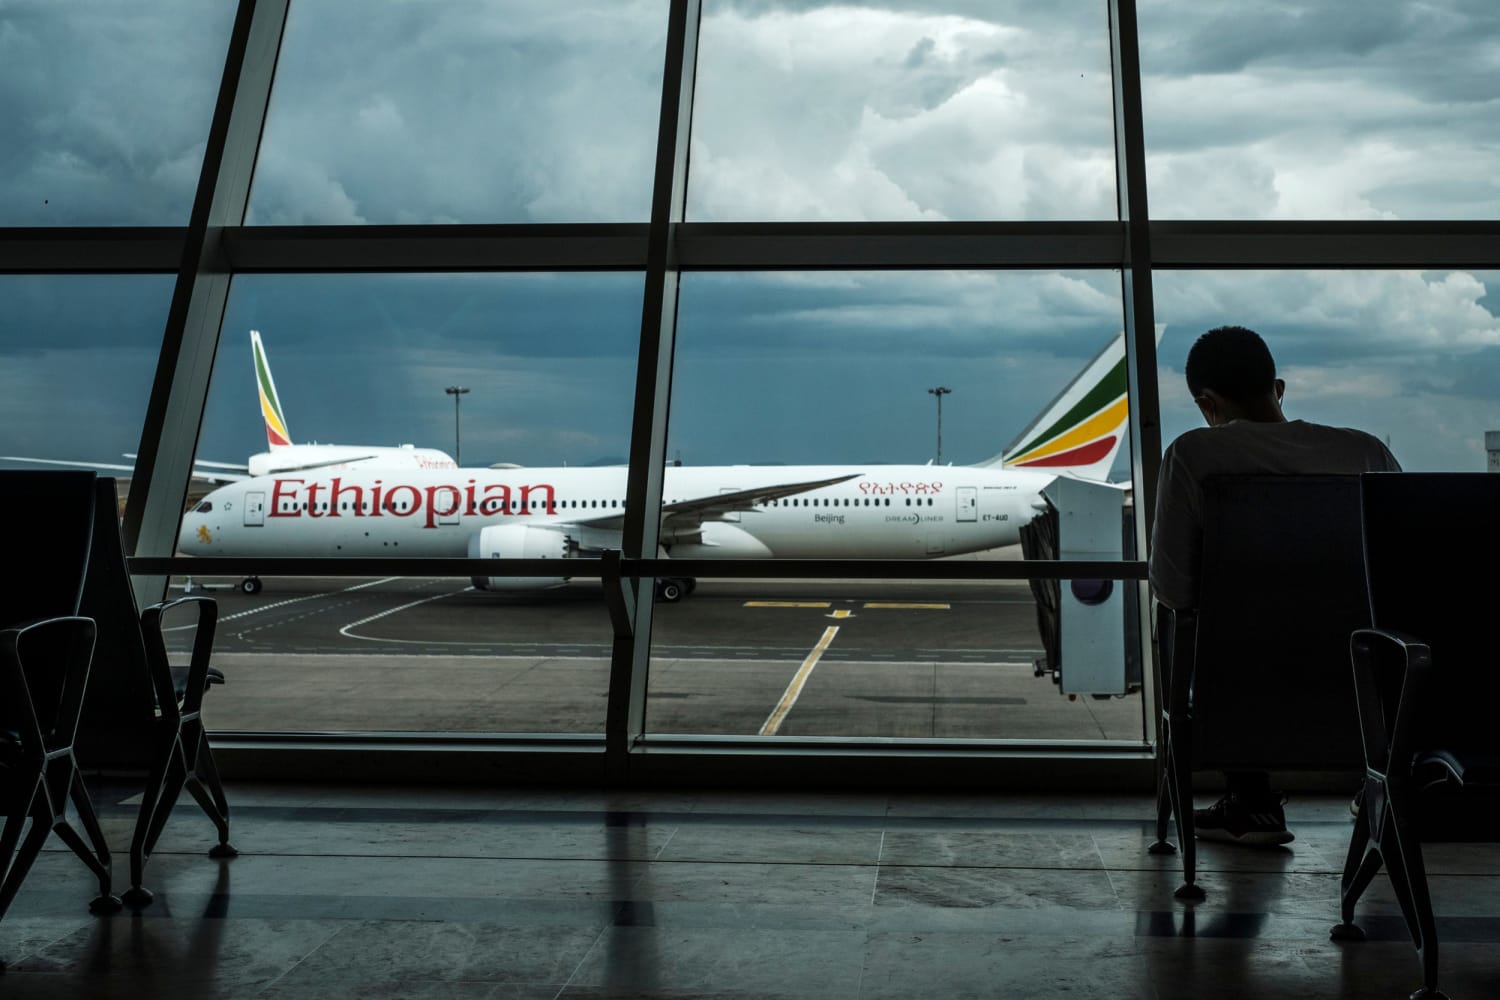 Ethiopian Airlines to resume using Boeing 737 Max planes in February